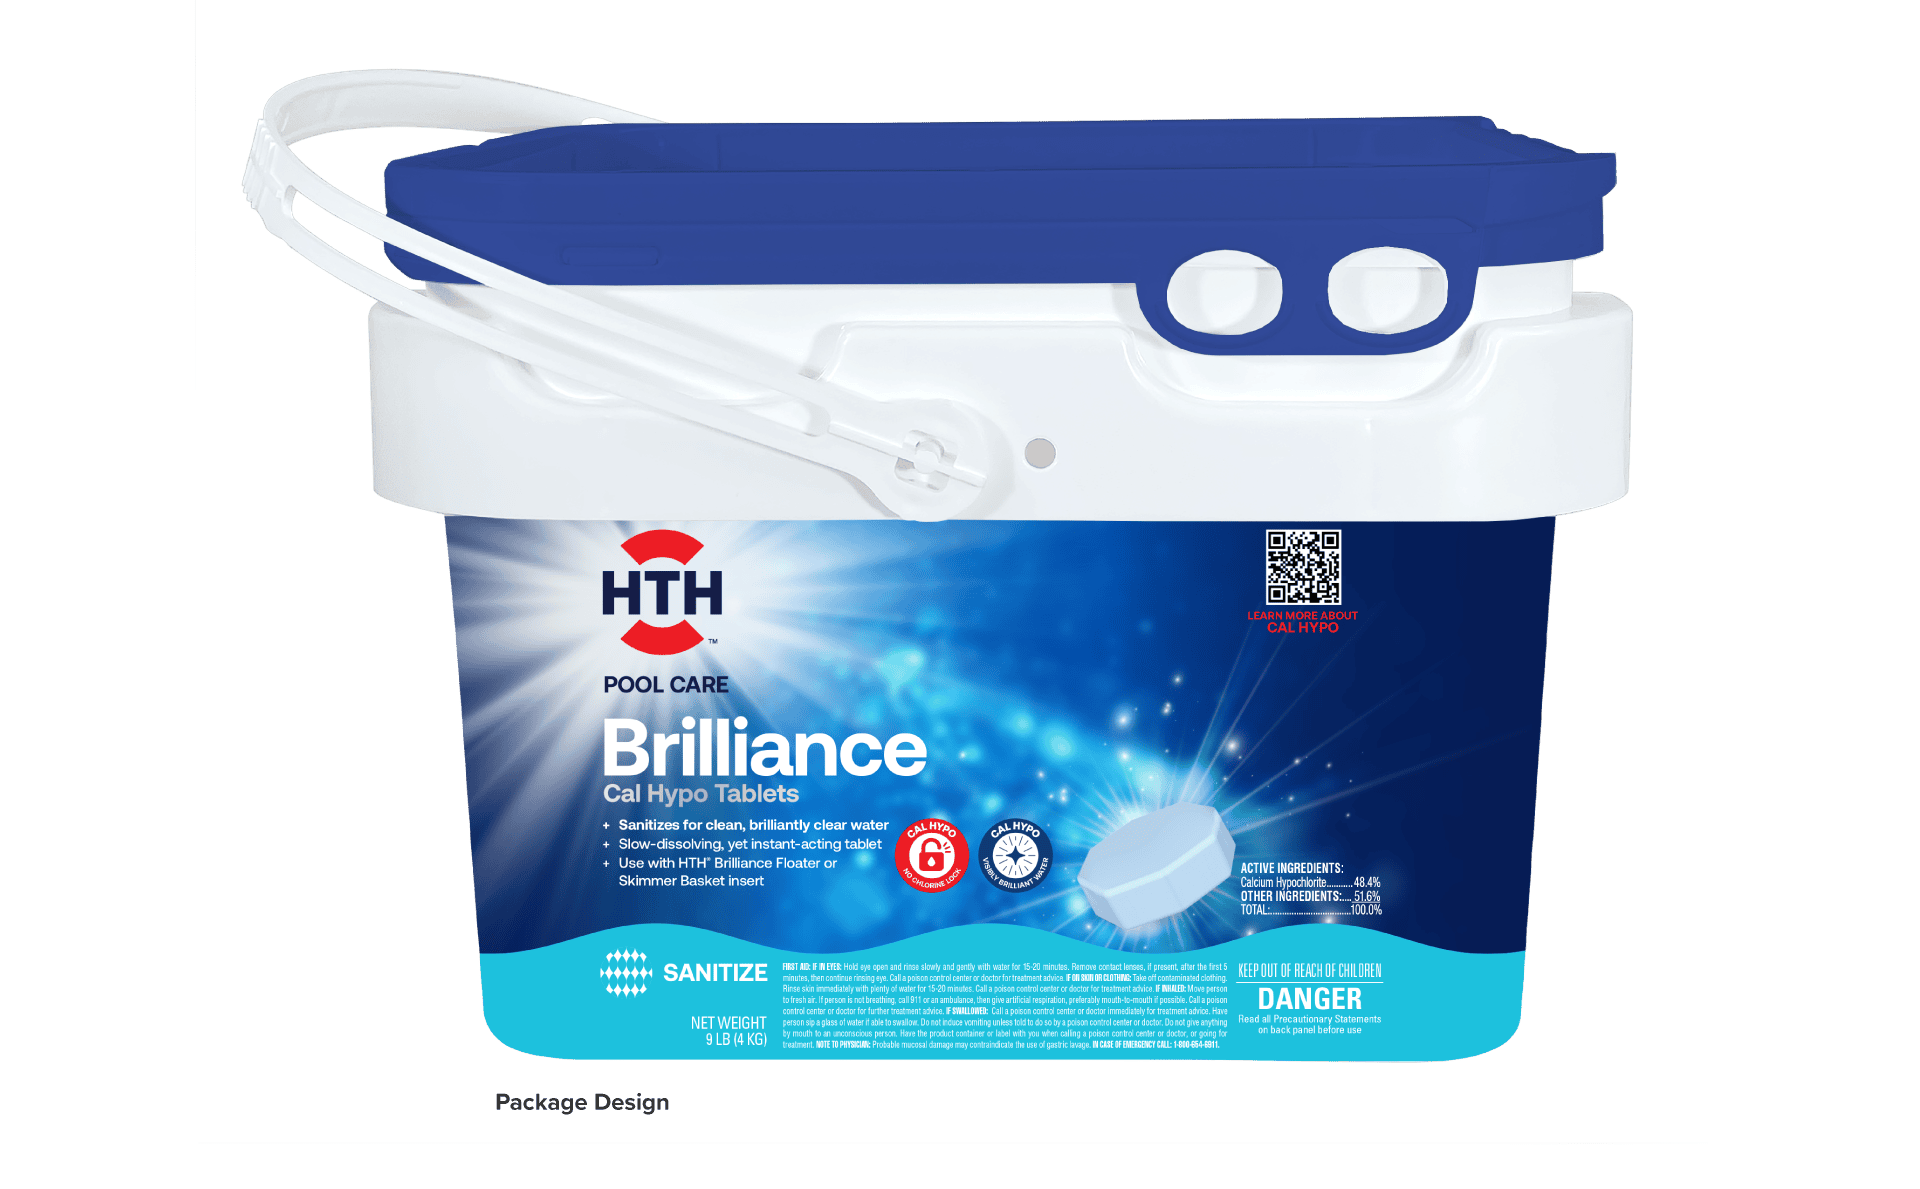 HTH Pool Care Packaging